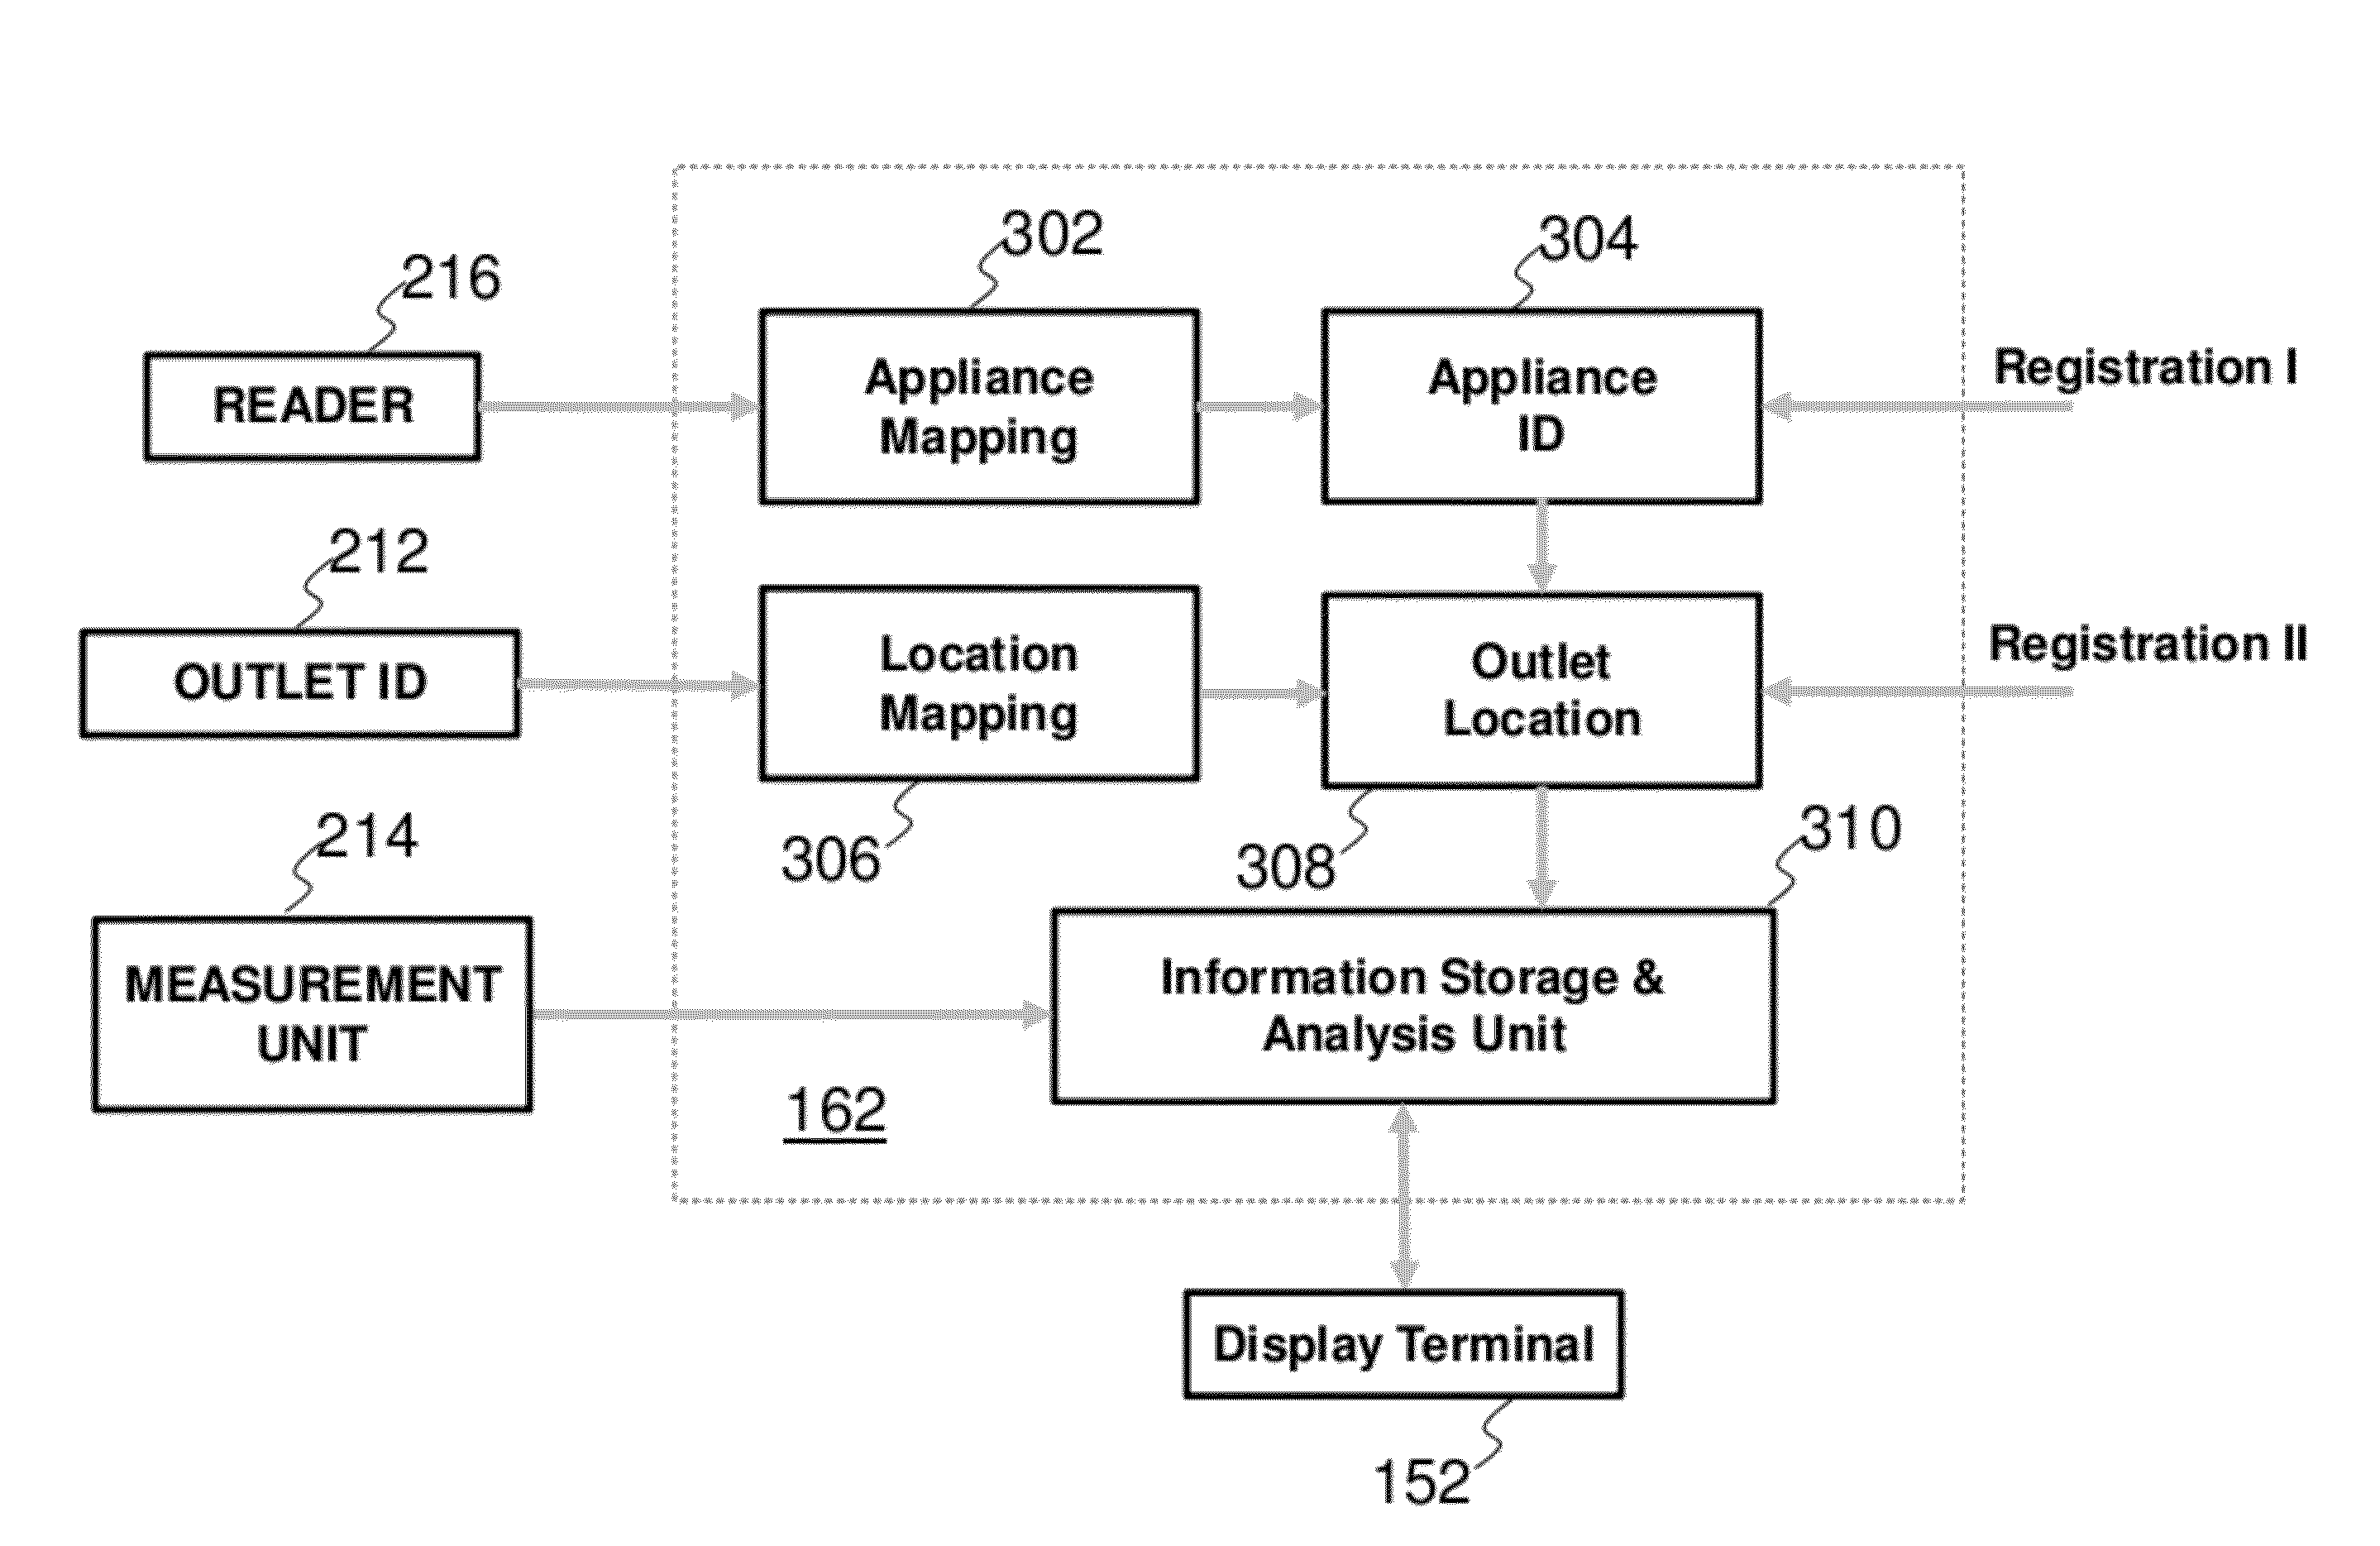 Apparatus for Smart Home Network